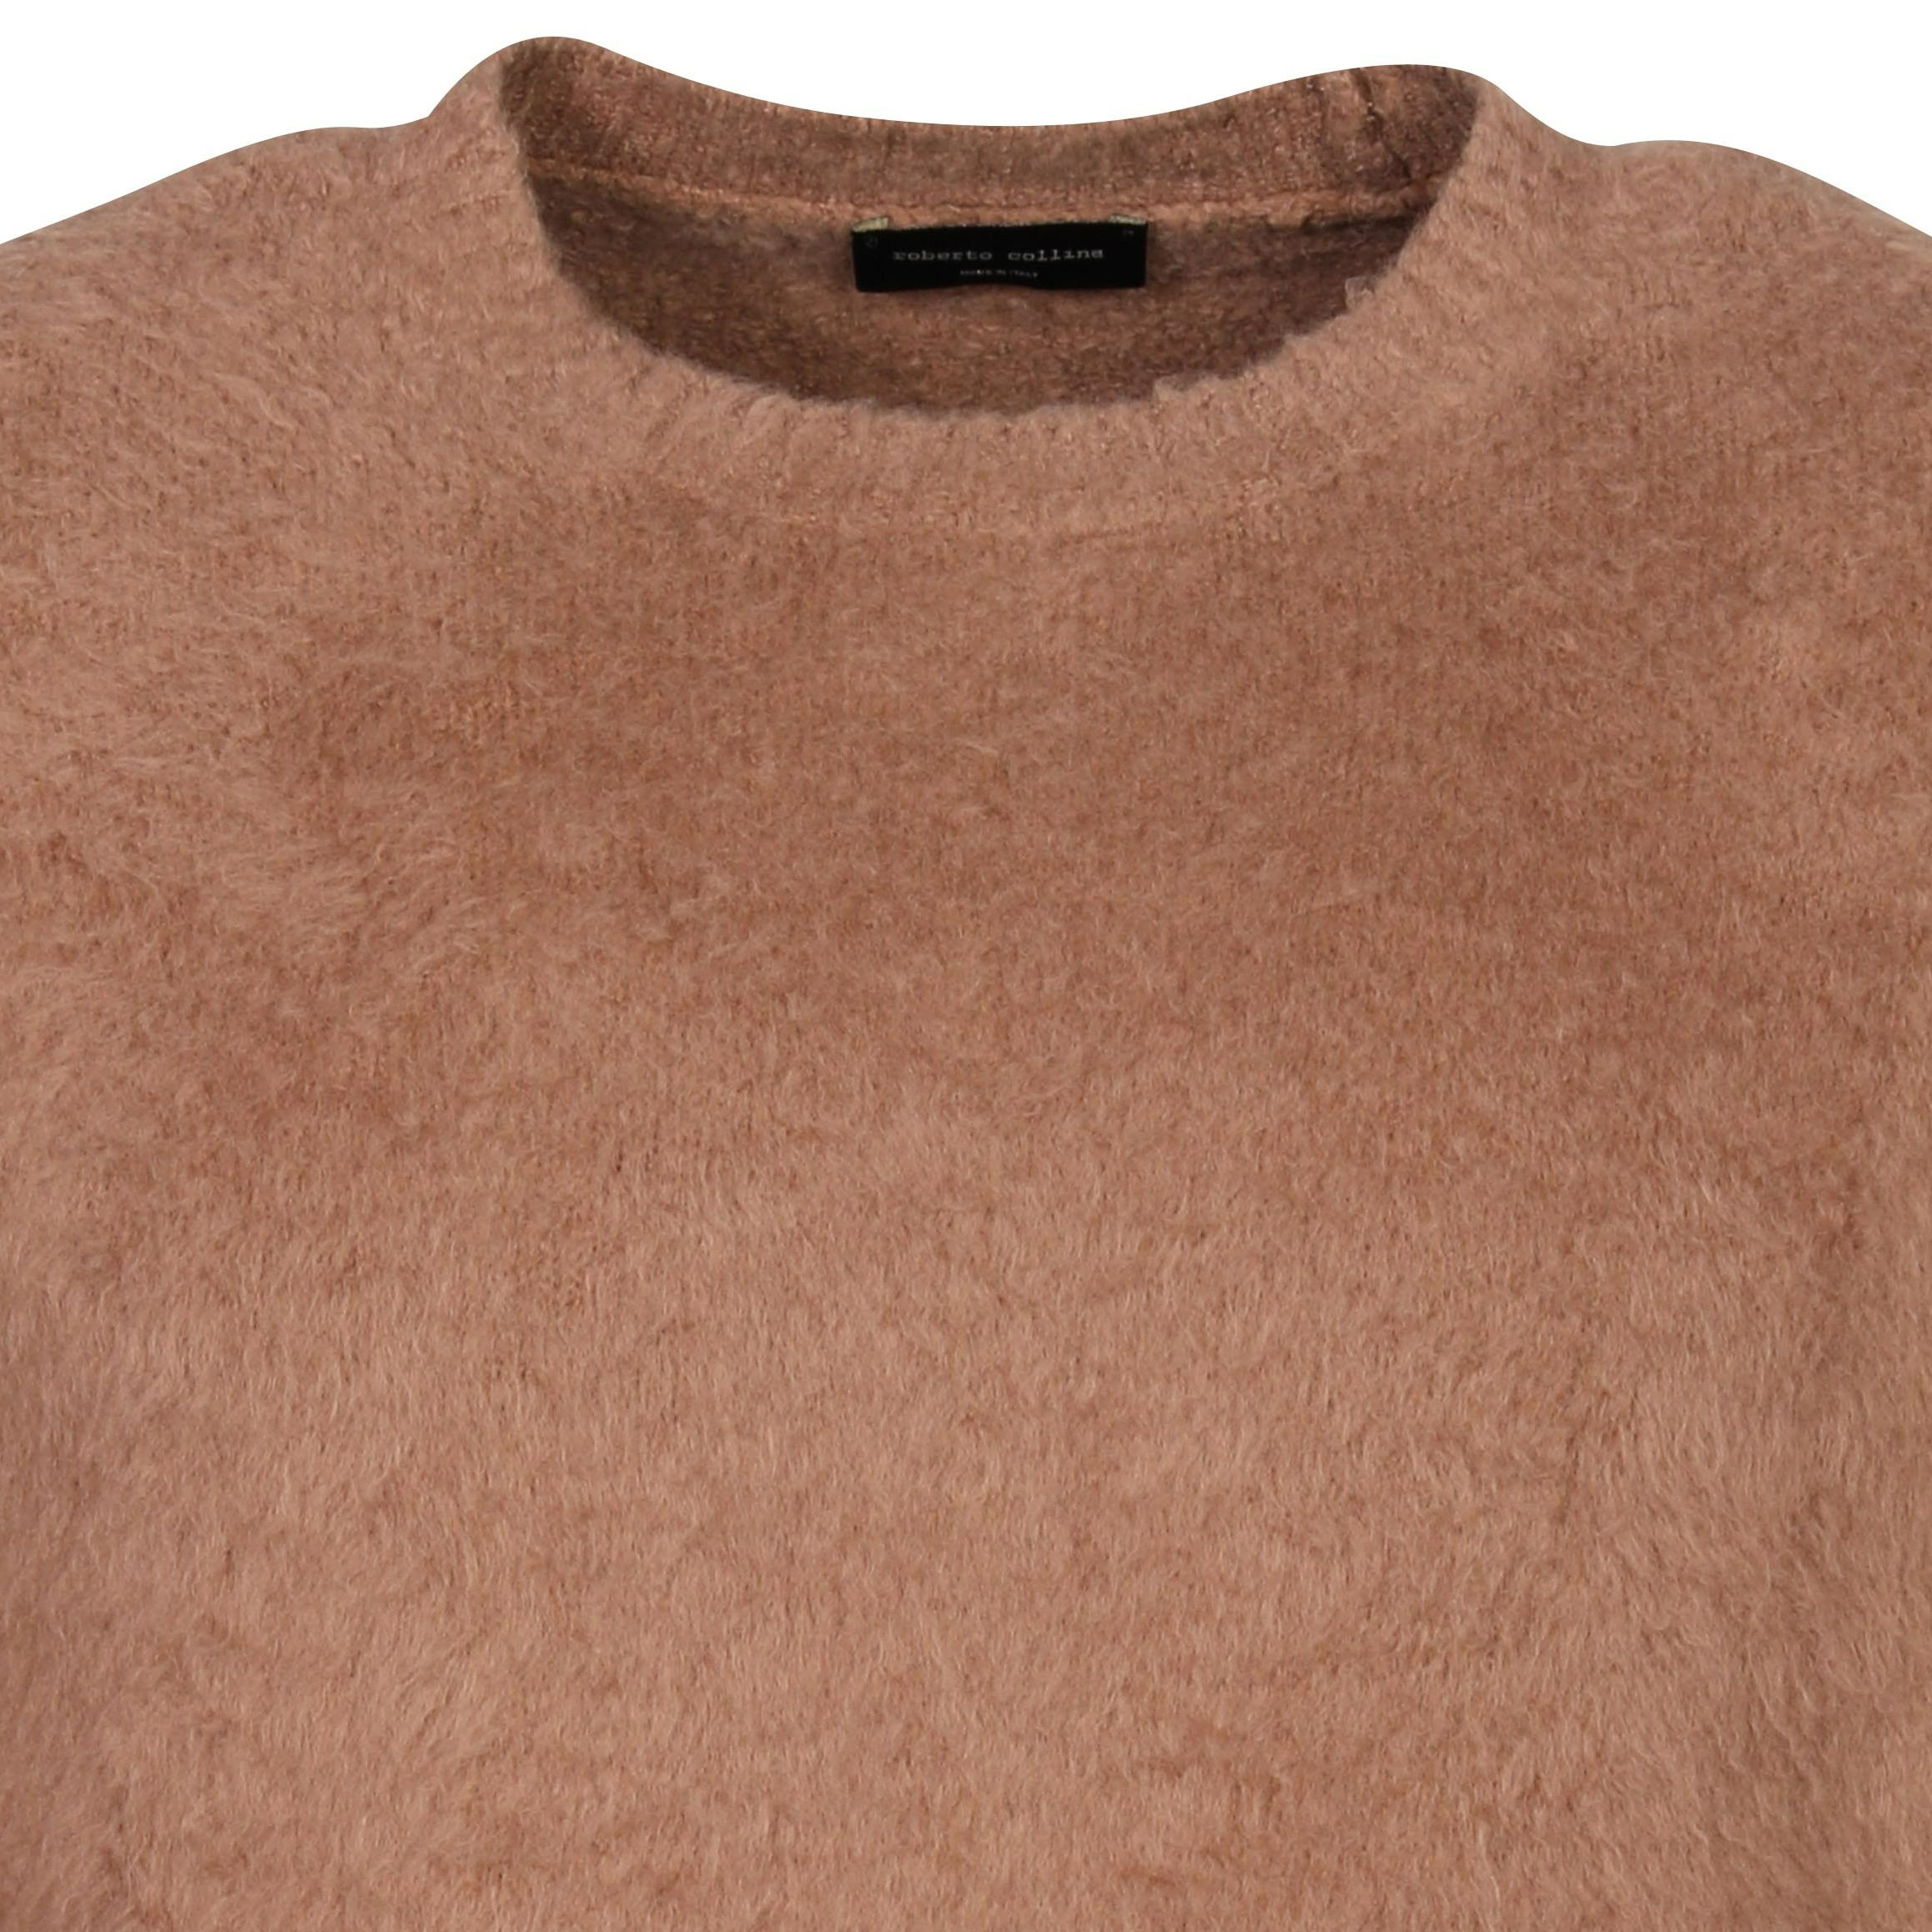 Roberto Collina Cotton Fluffy Knit Pullover in Camel 48